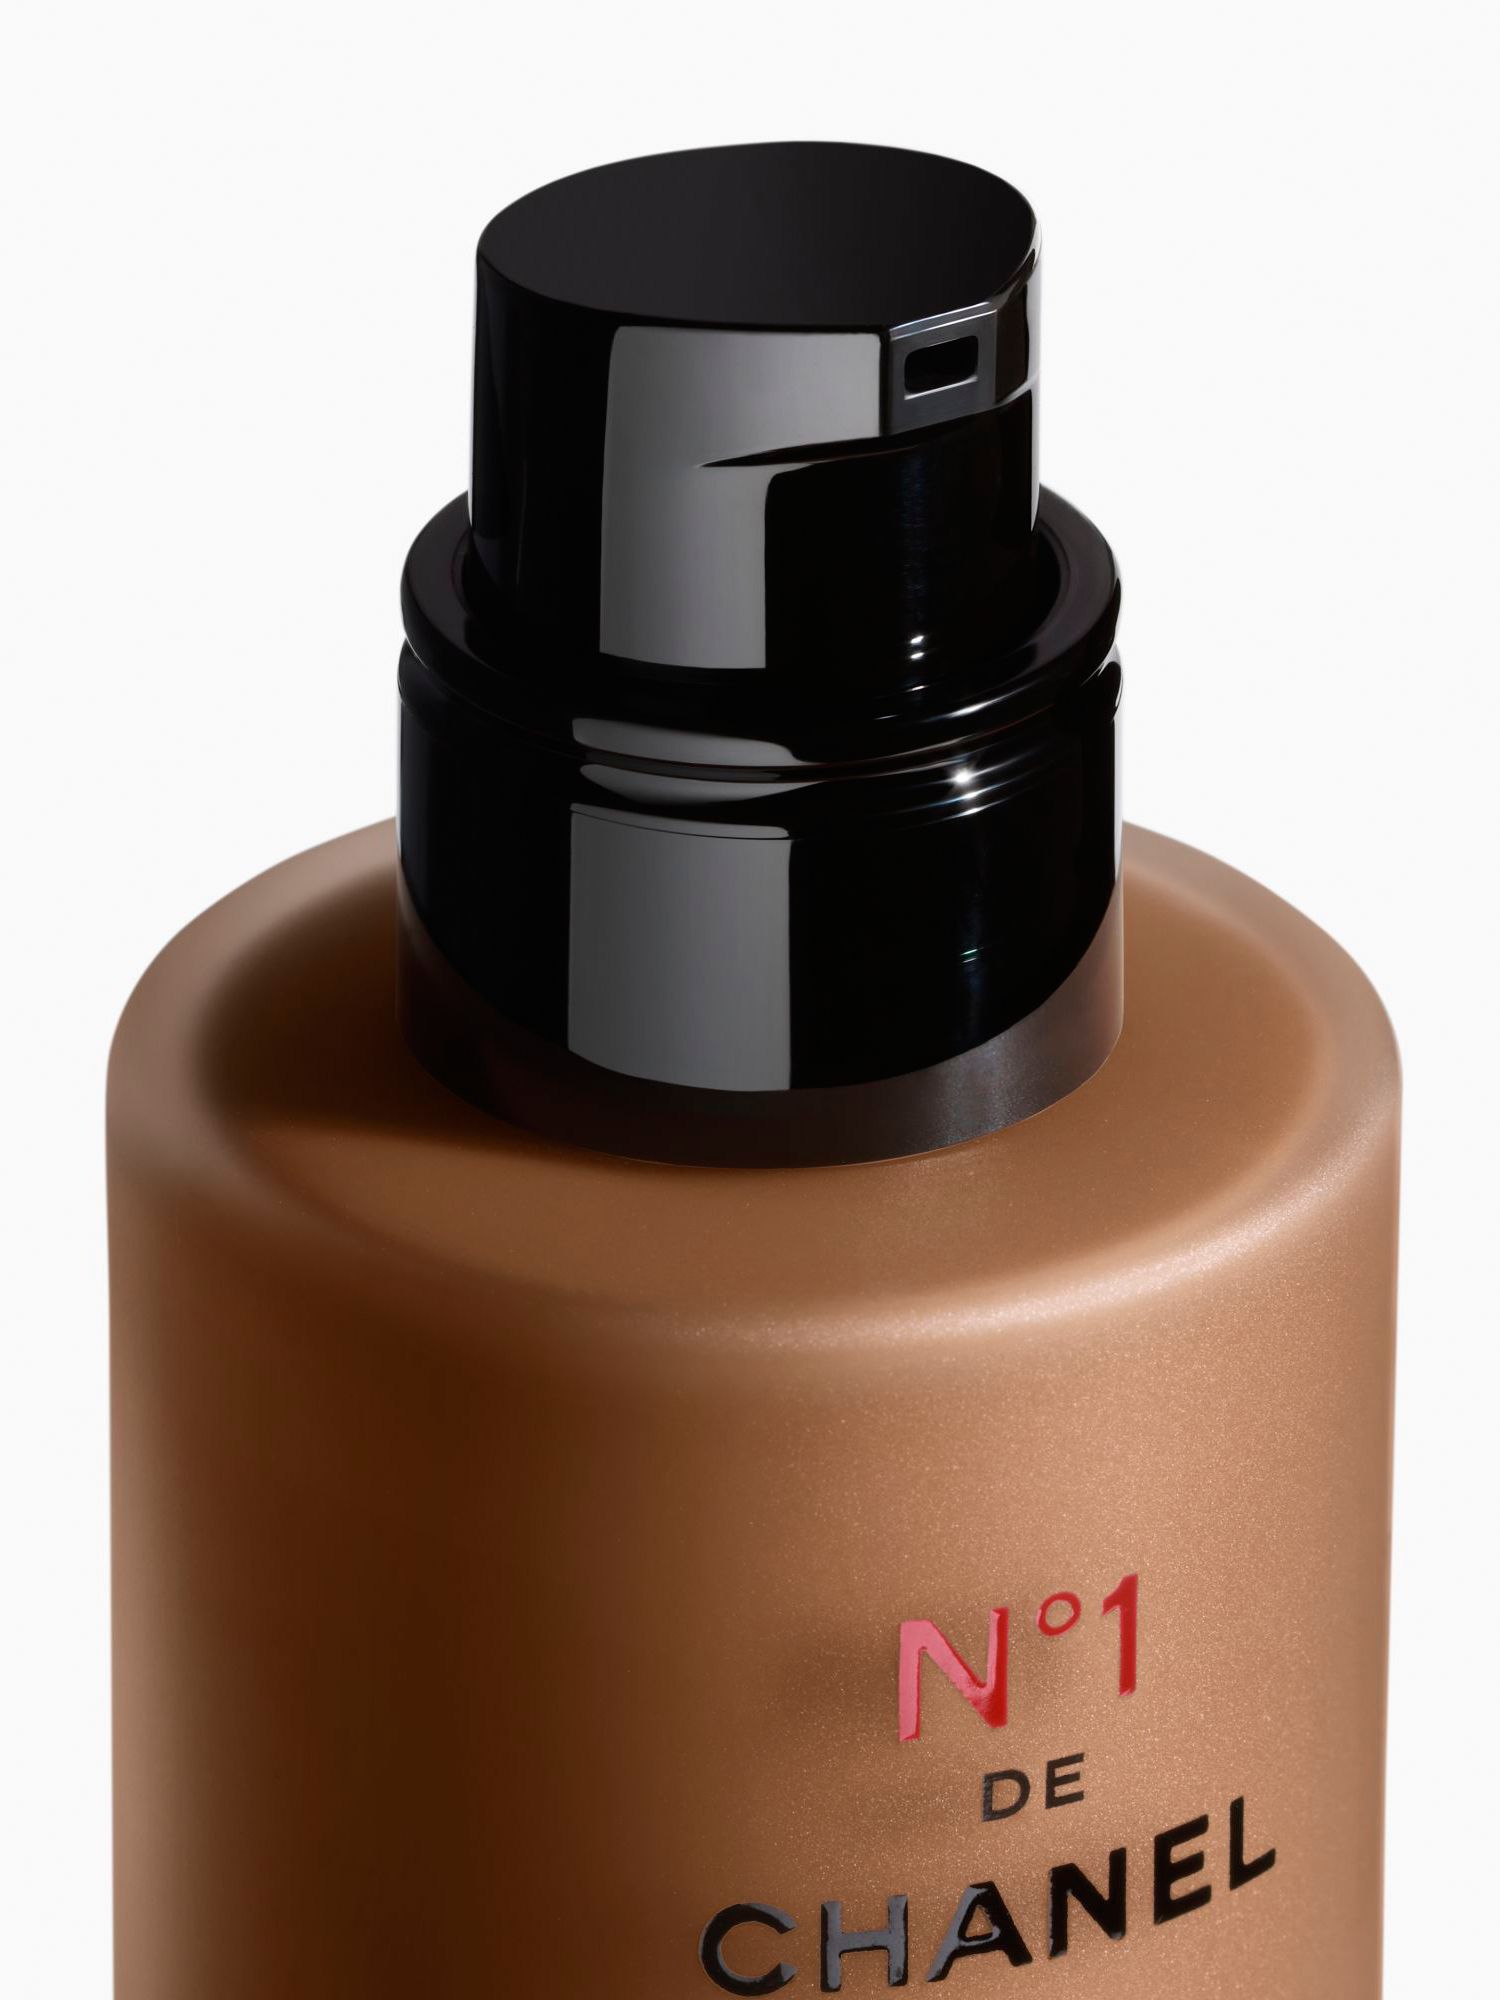 CHANEL N°1 De CHANEL Revitalising Foundation Illuminates - Hydrates -  Protects, BR152 at John Lewis & Partners